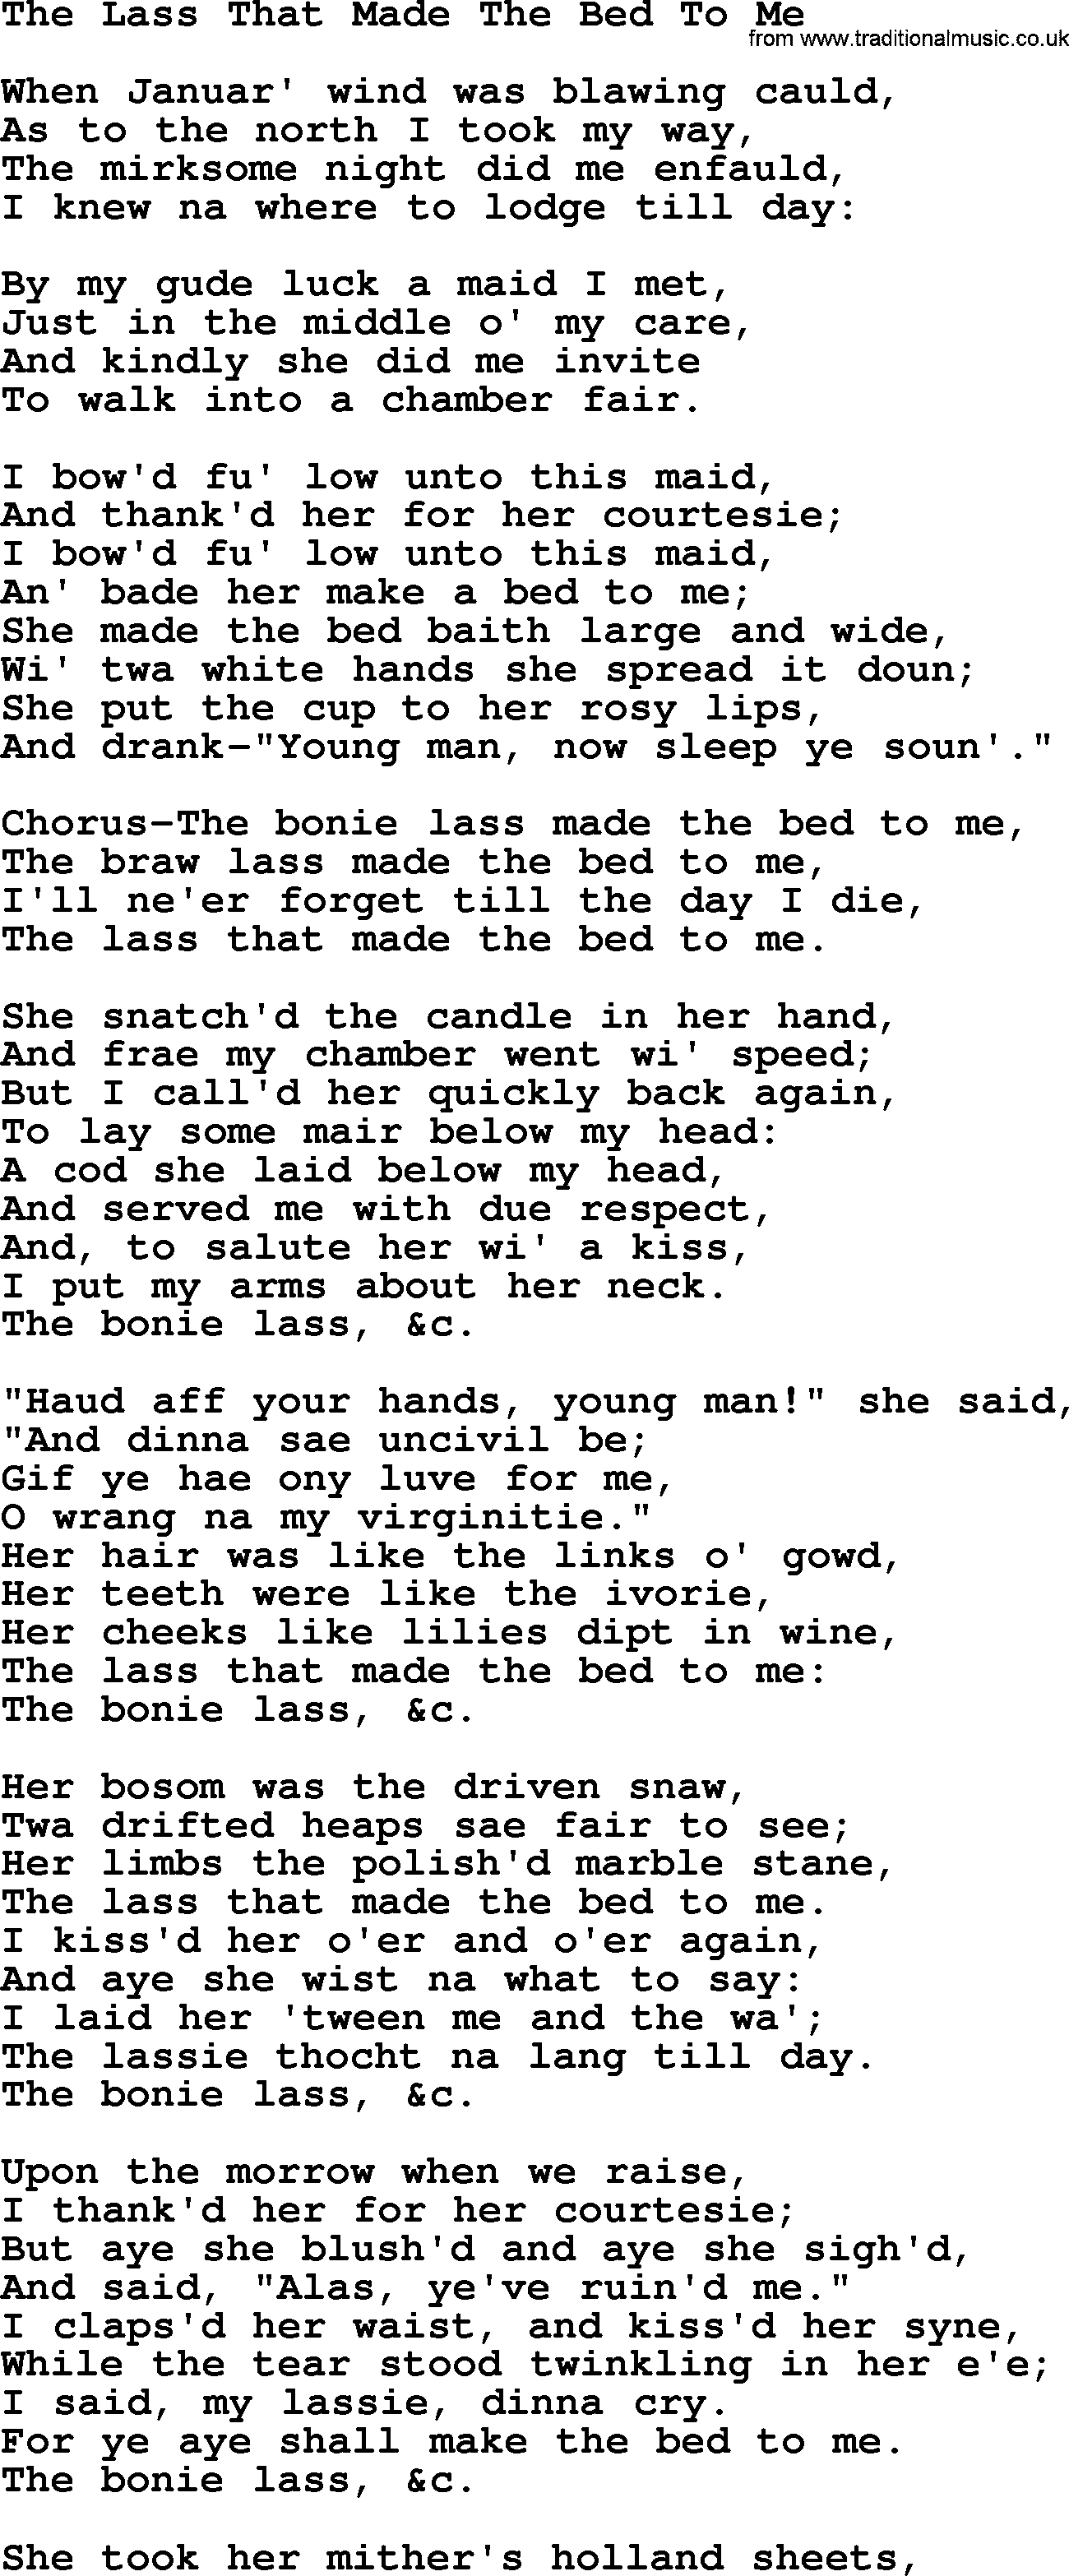 Robert Burns Songs & Lyrics: The Lass That Made The Bed To Me